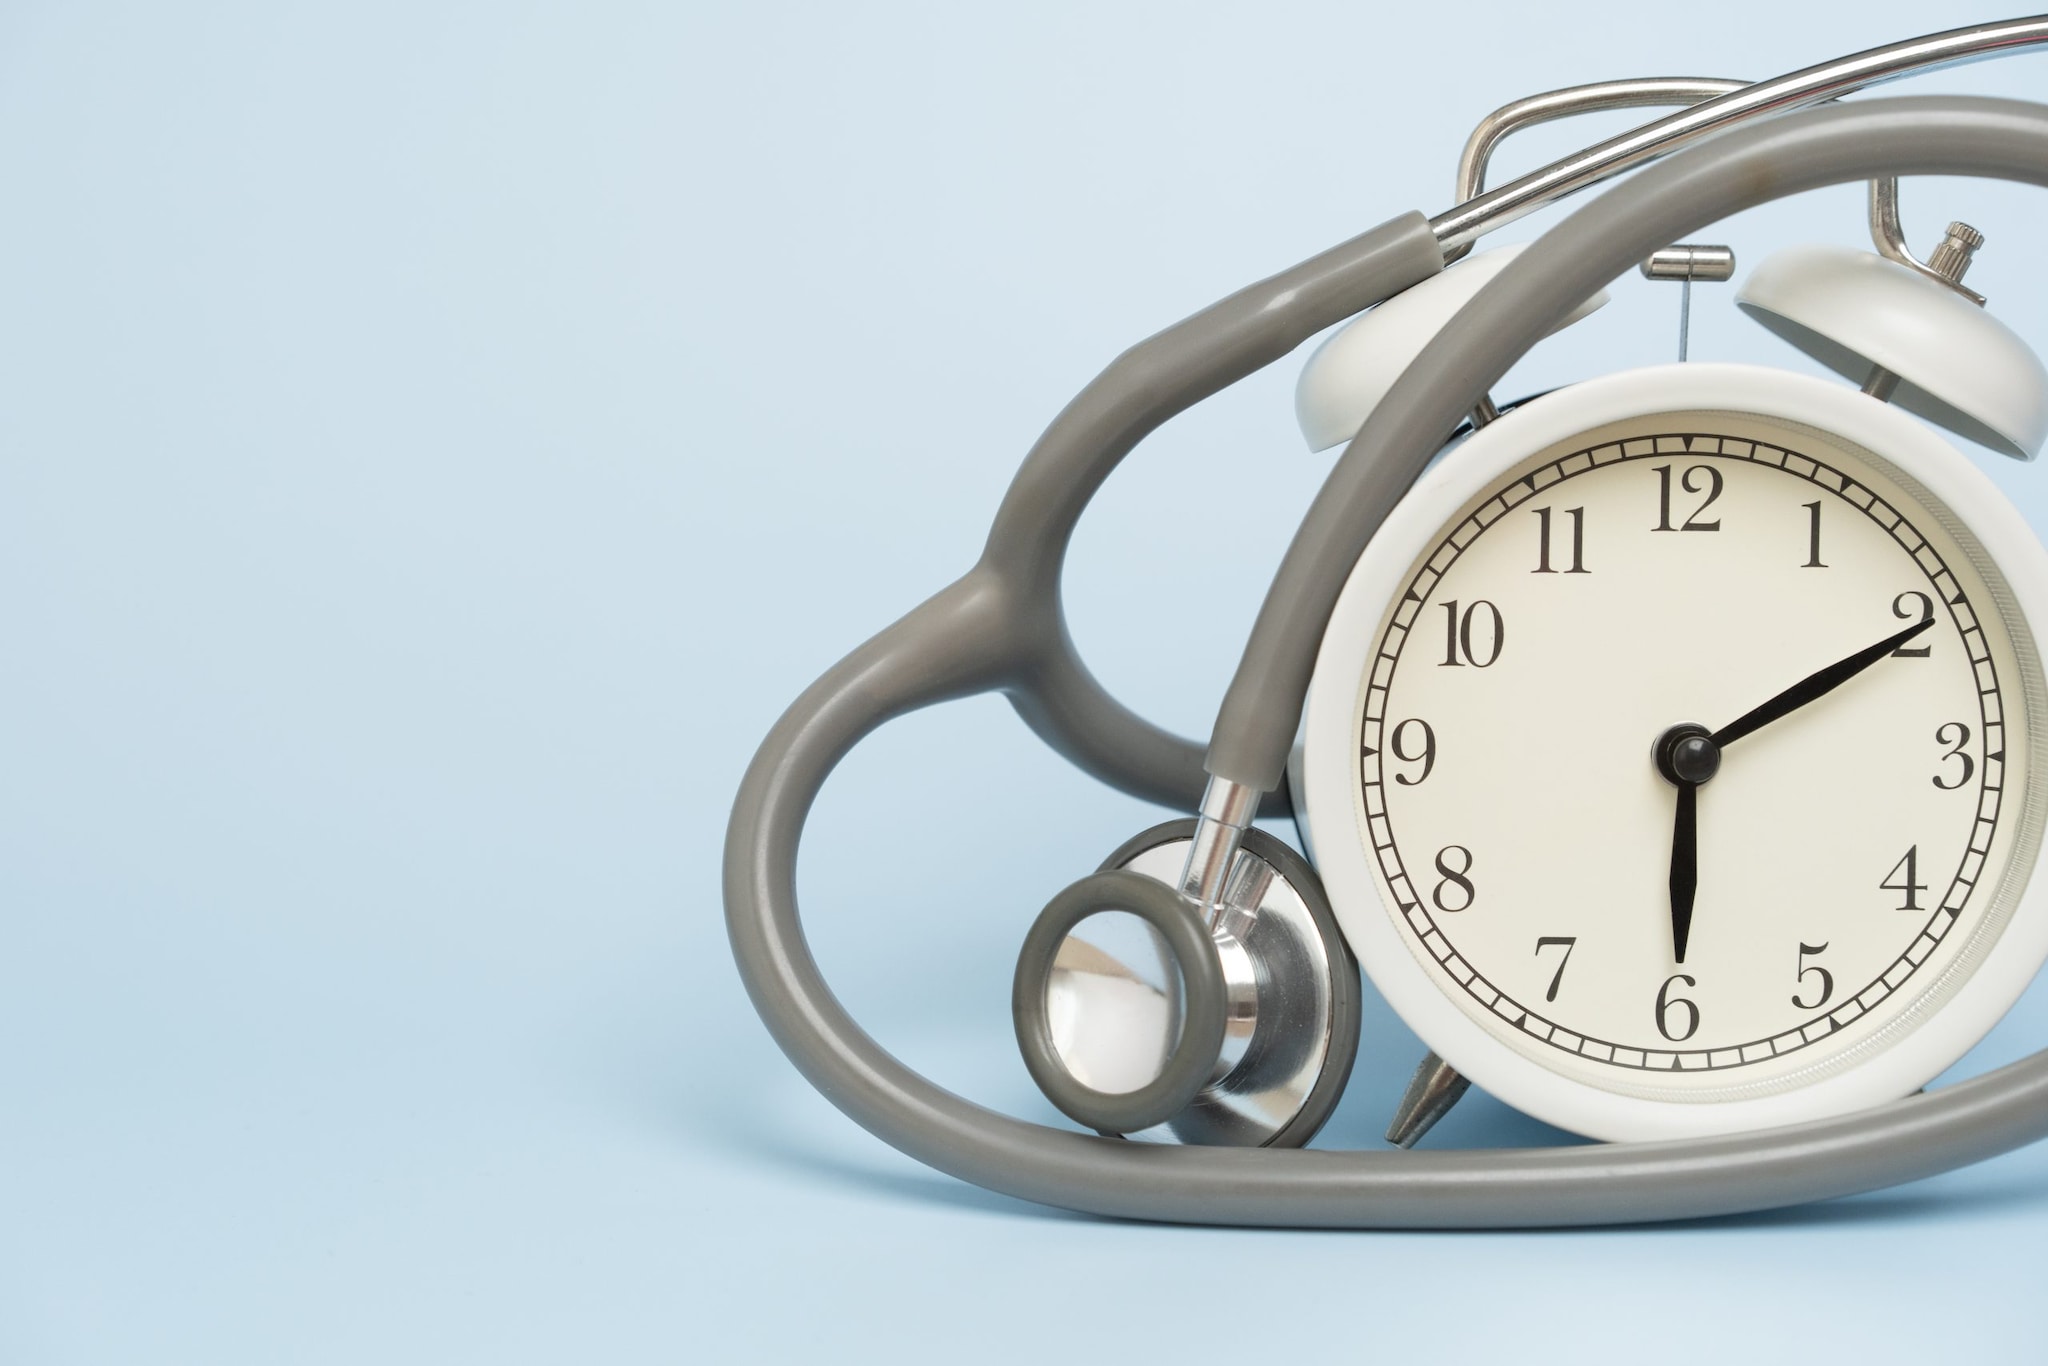 Close-up of a grey stethoscope draped over an analog alarm clock